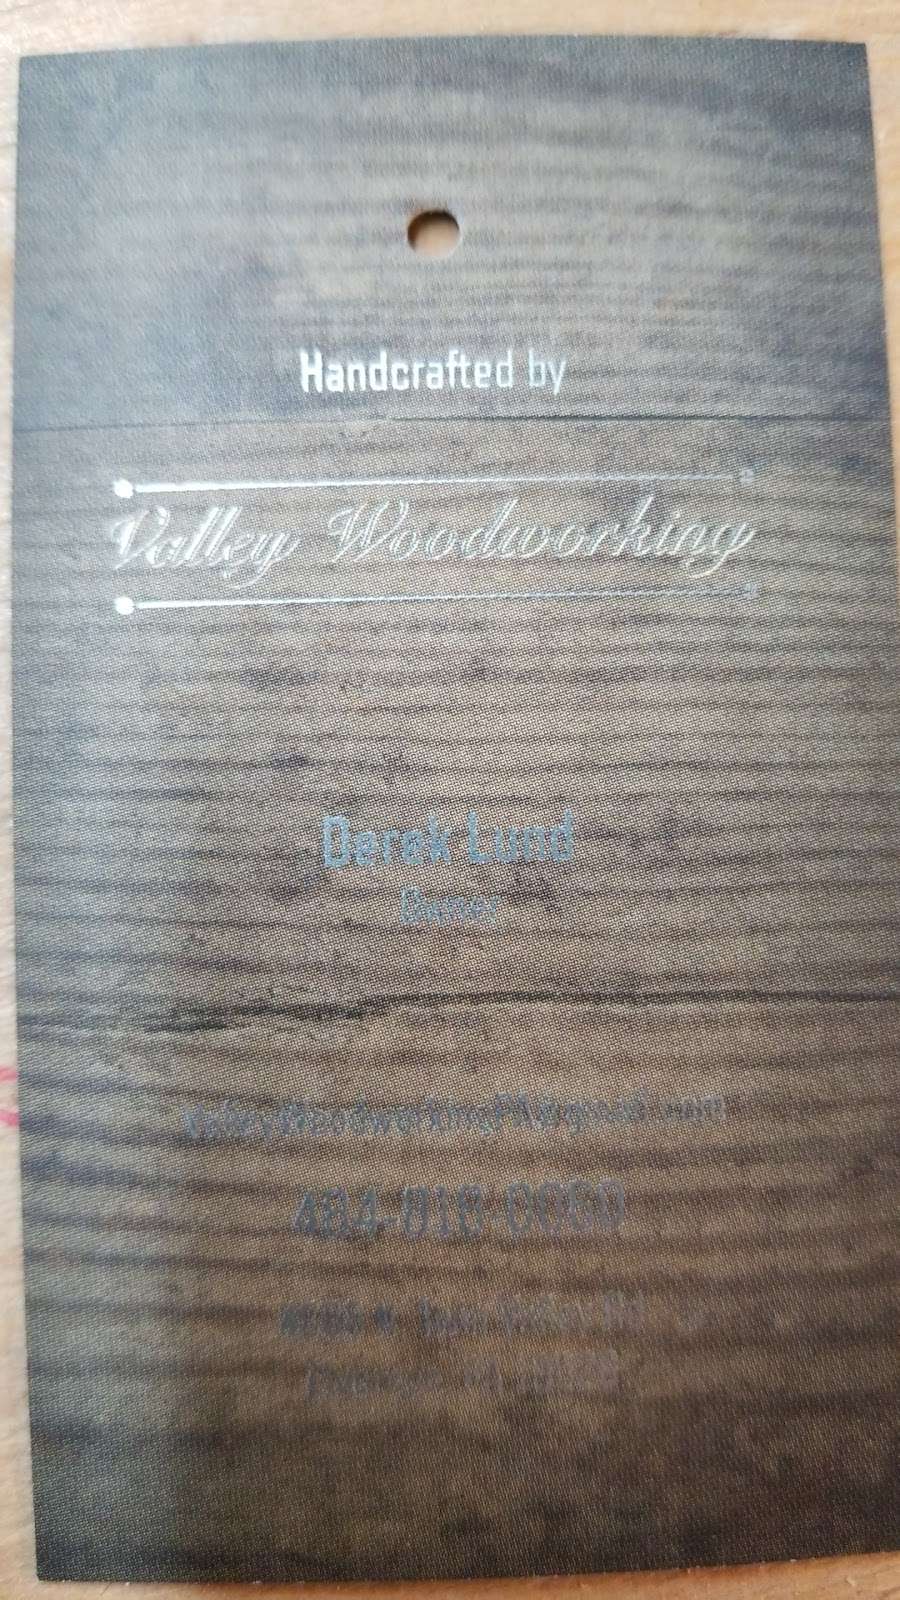 Valley Woodworking | 4688 N Twin Valley Rd, Elverson, PA 19520 | Phone: (484) 818-0060